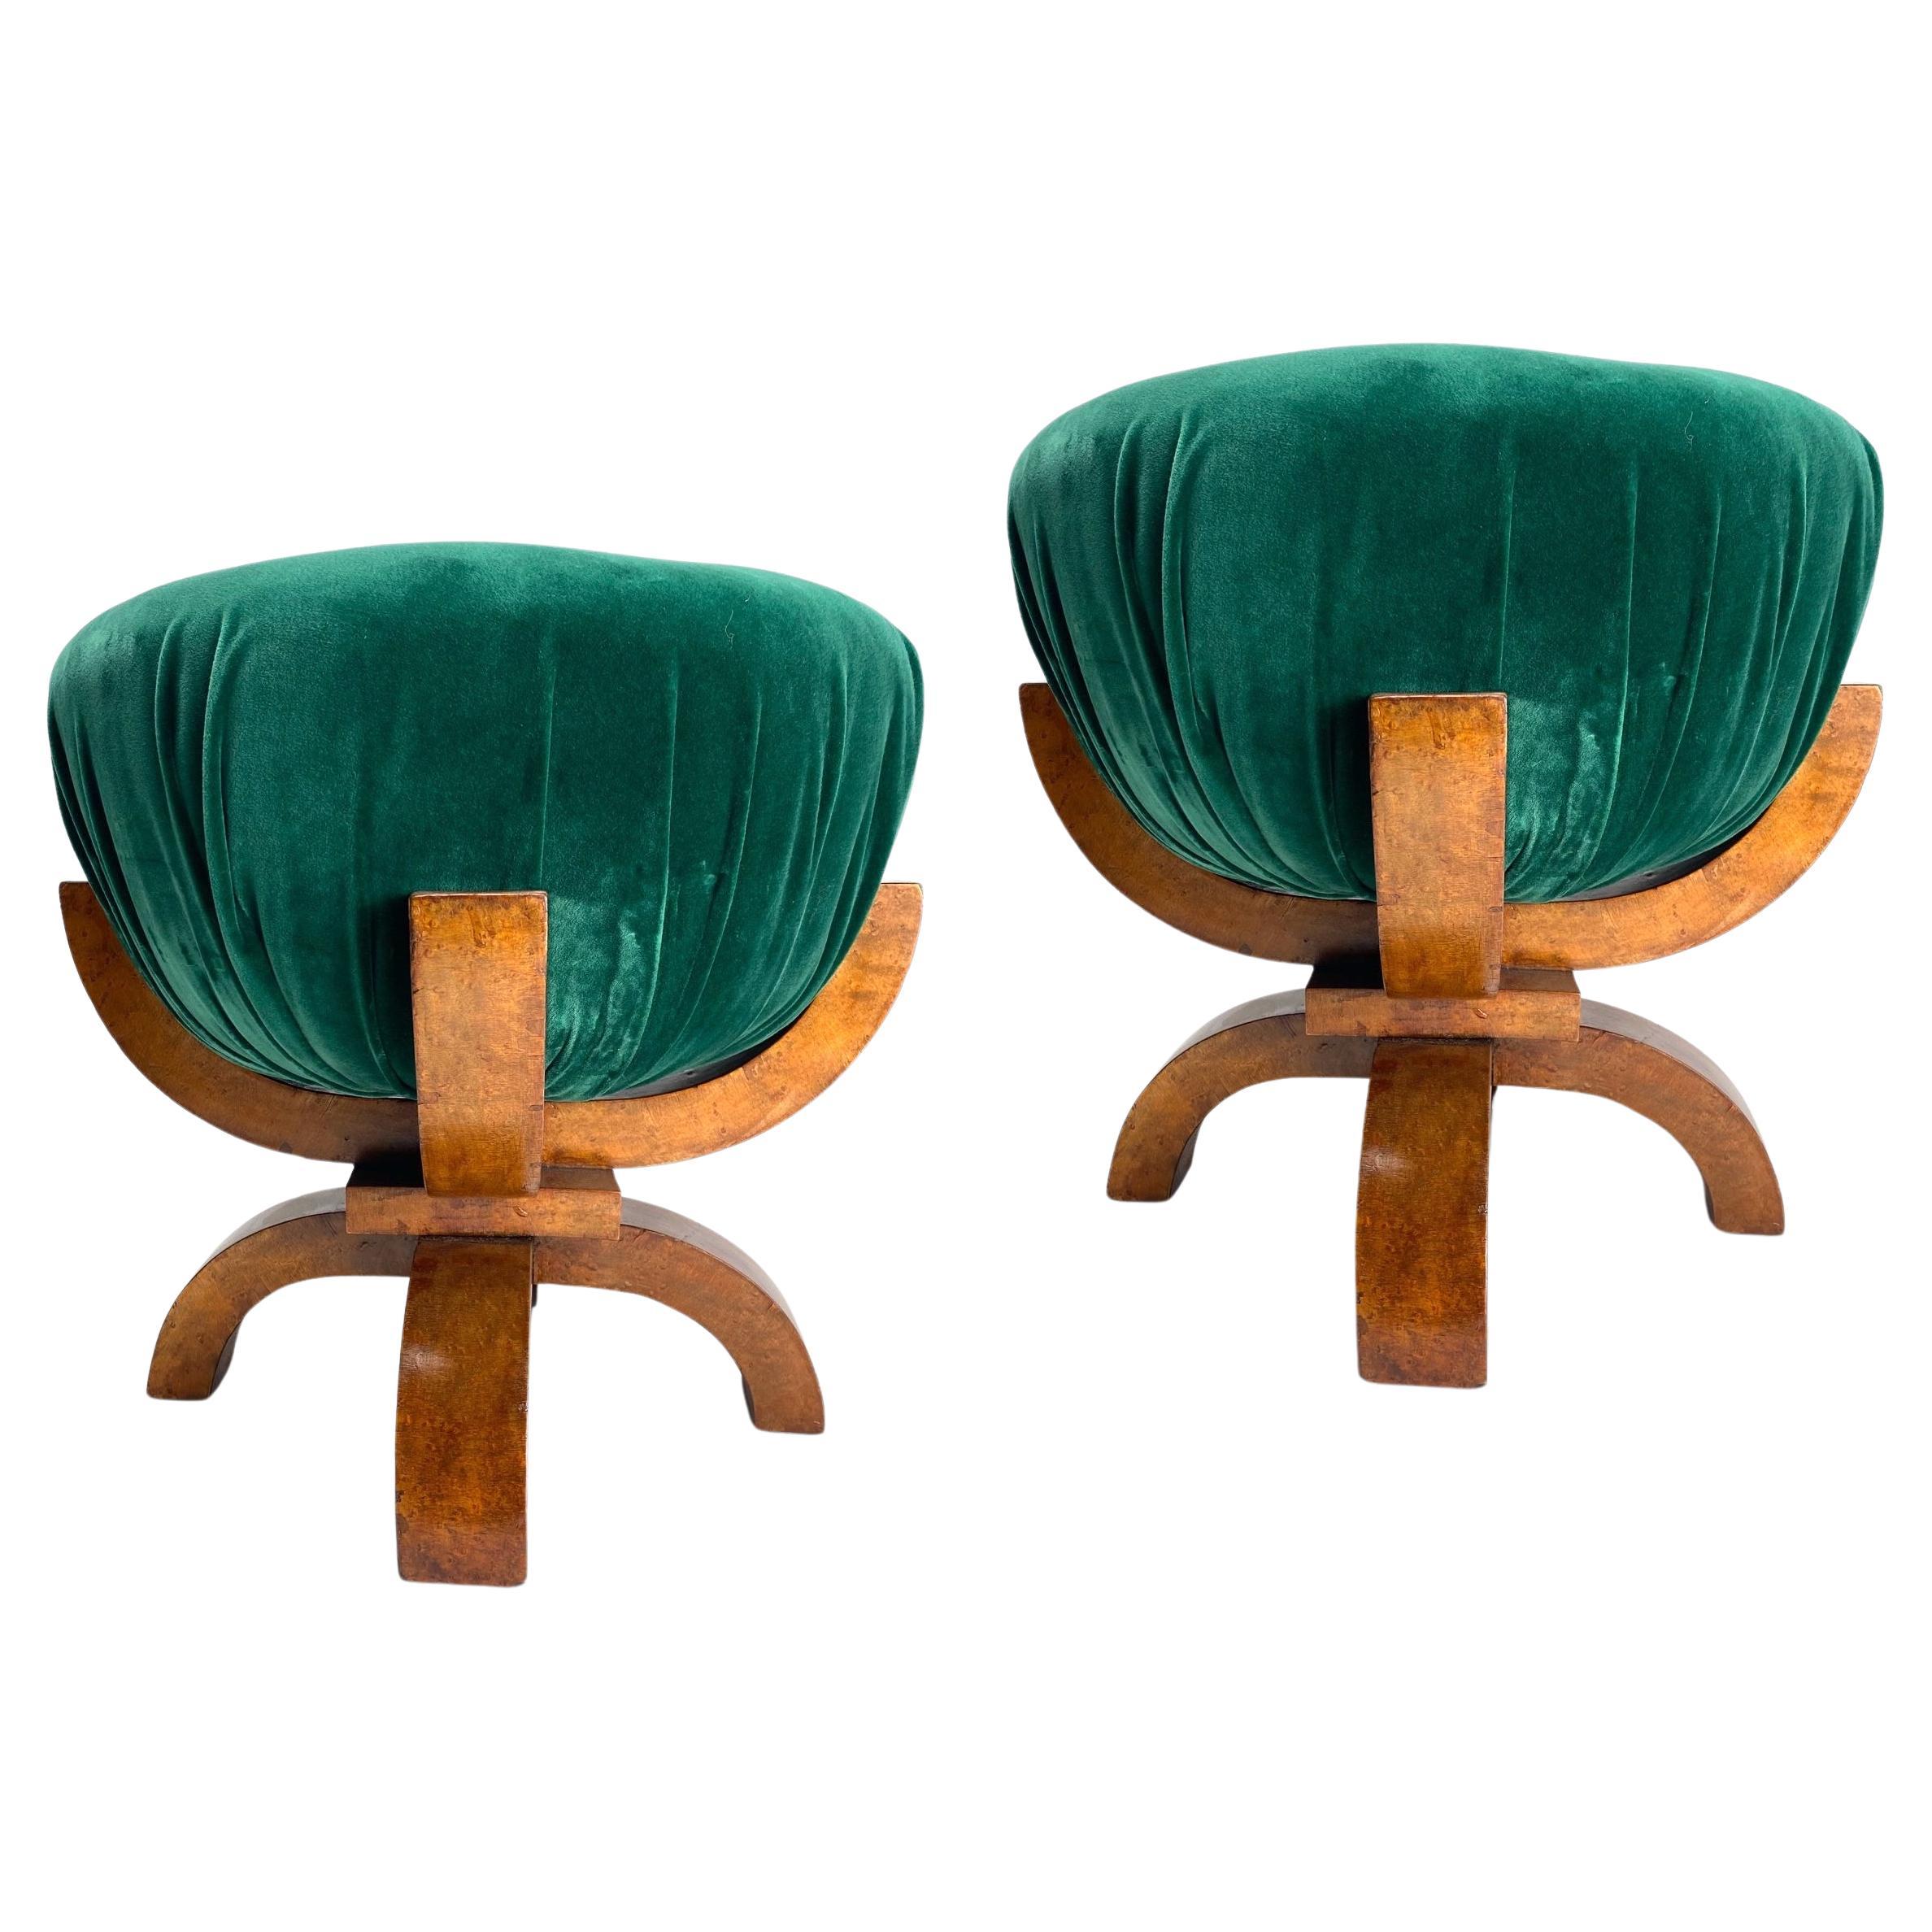 Pair of Art Deco Sculptural Poufs in briar, Italy, 1930s For Sale